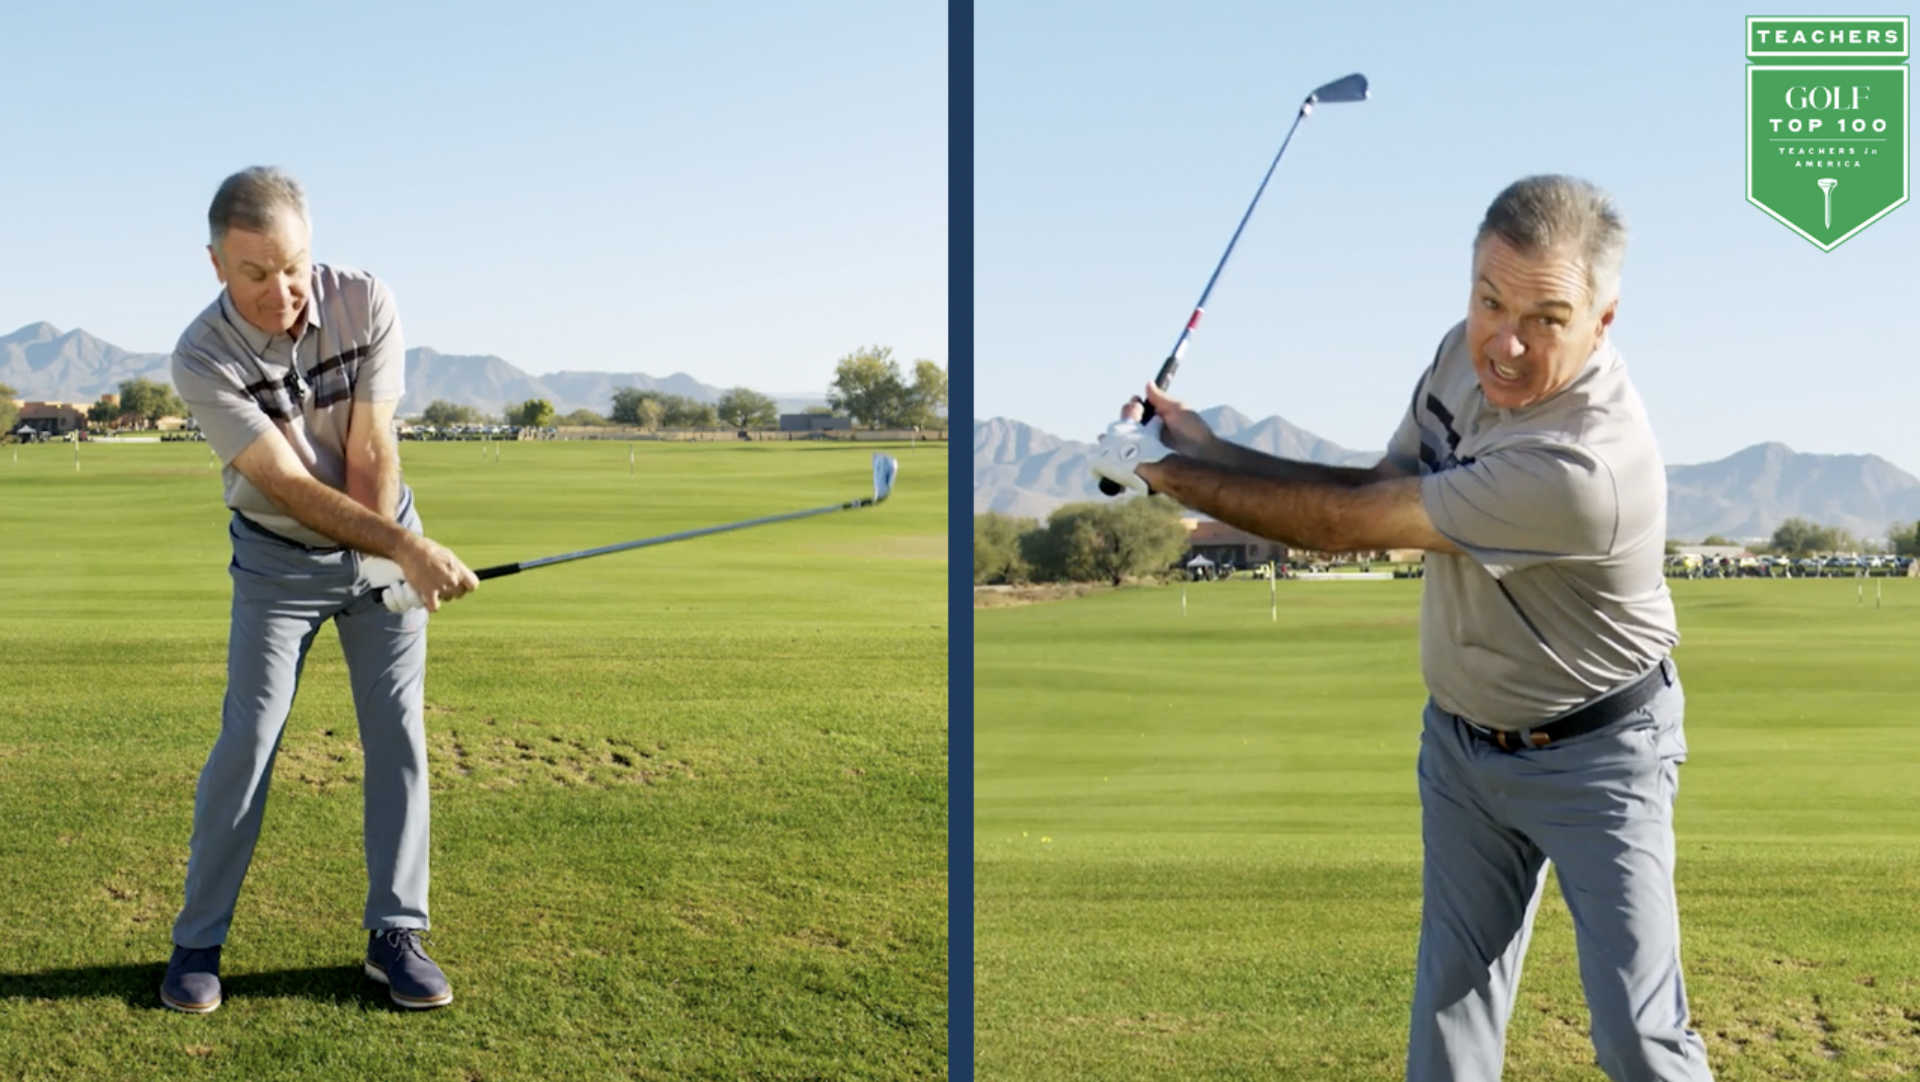 Fling your wrists like these pros for a better golf swing